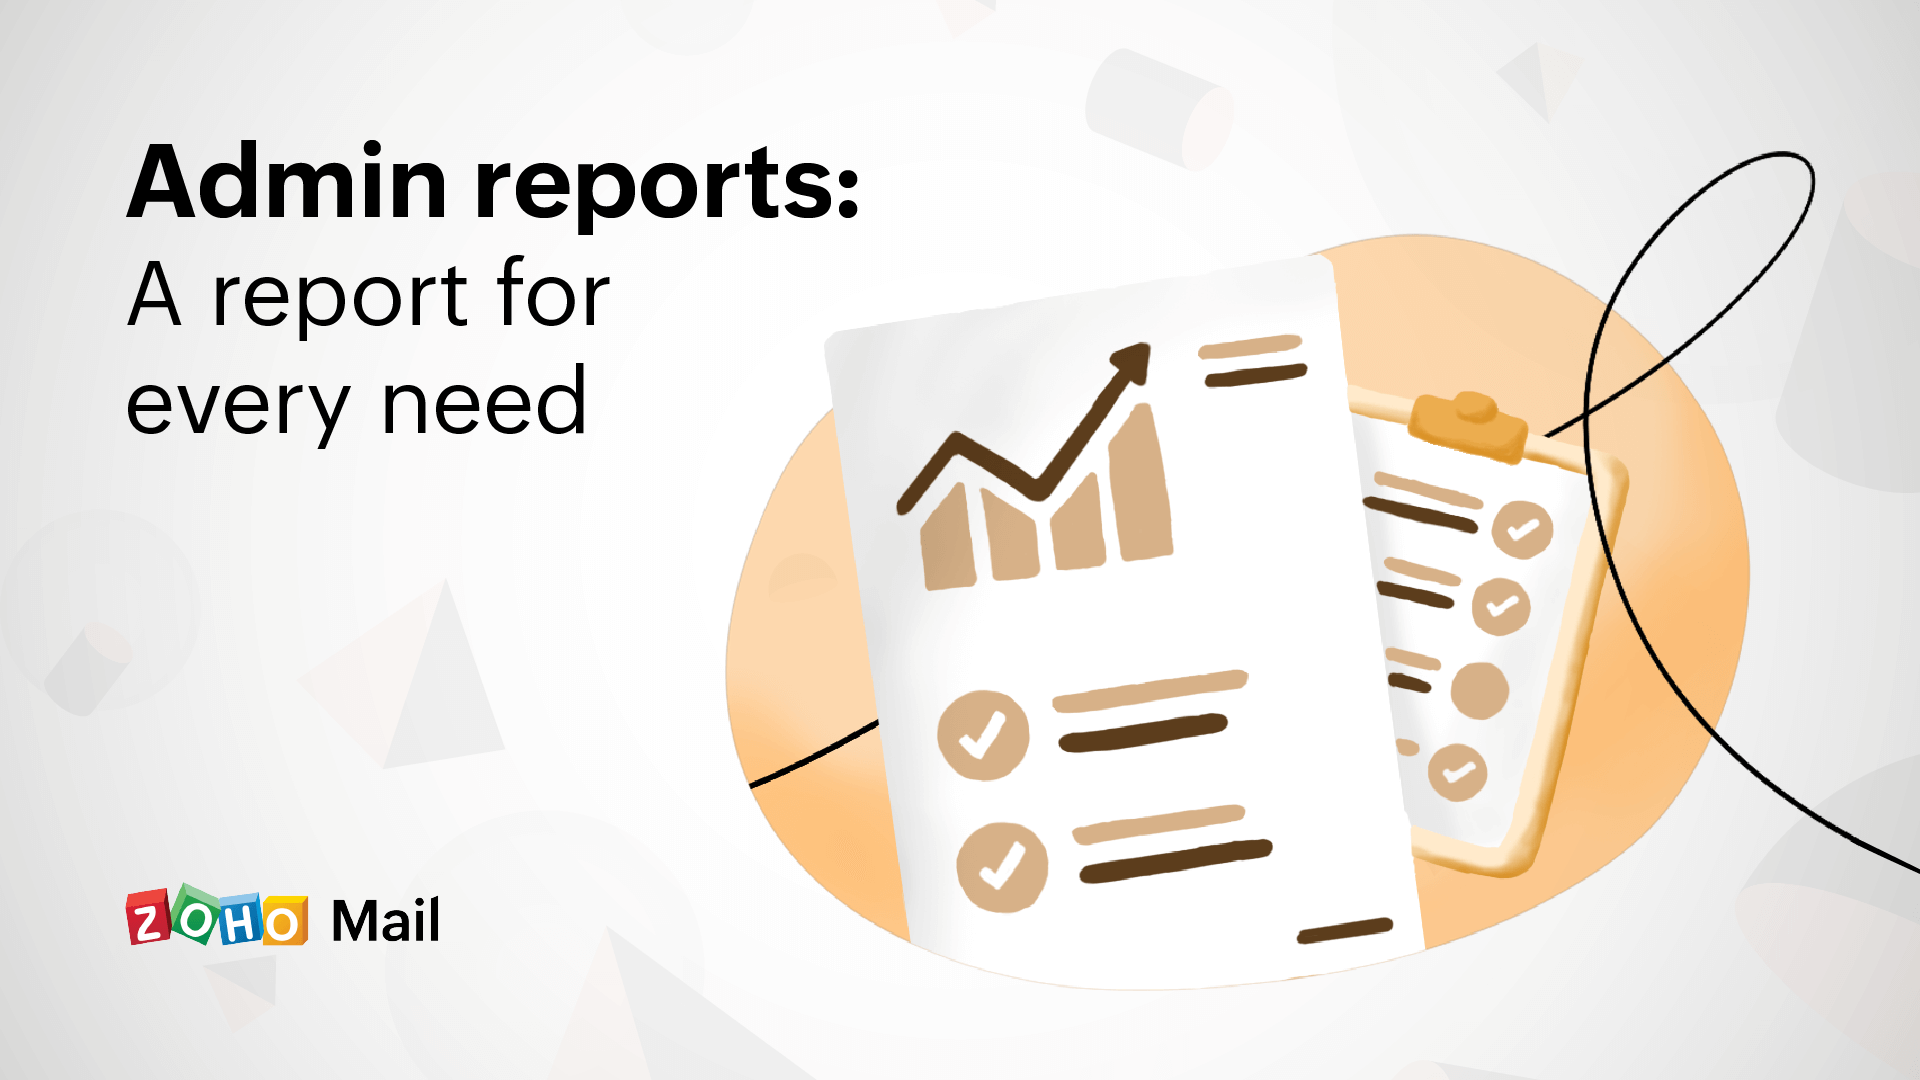 Zoho Mail's Admin reports: A report for every need